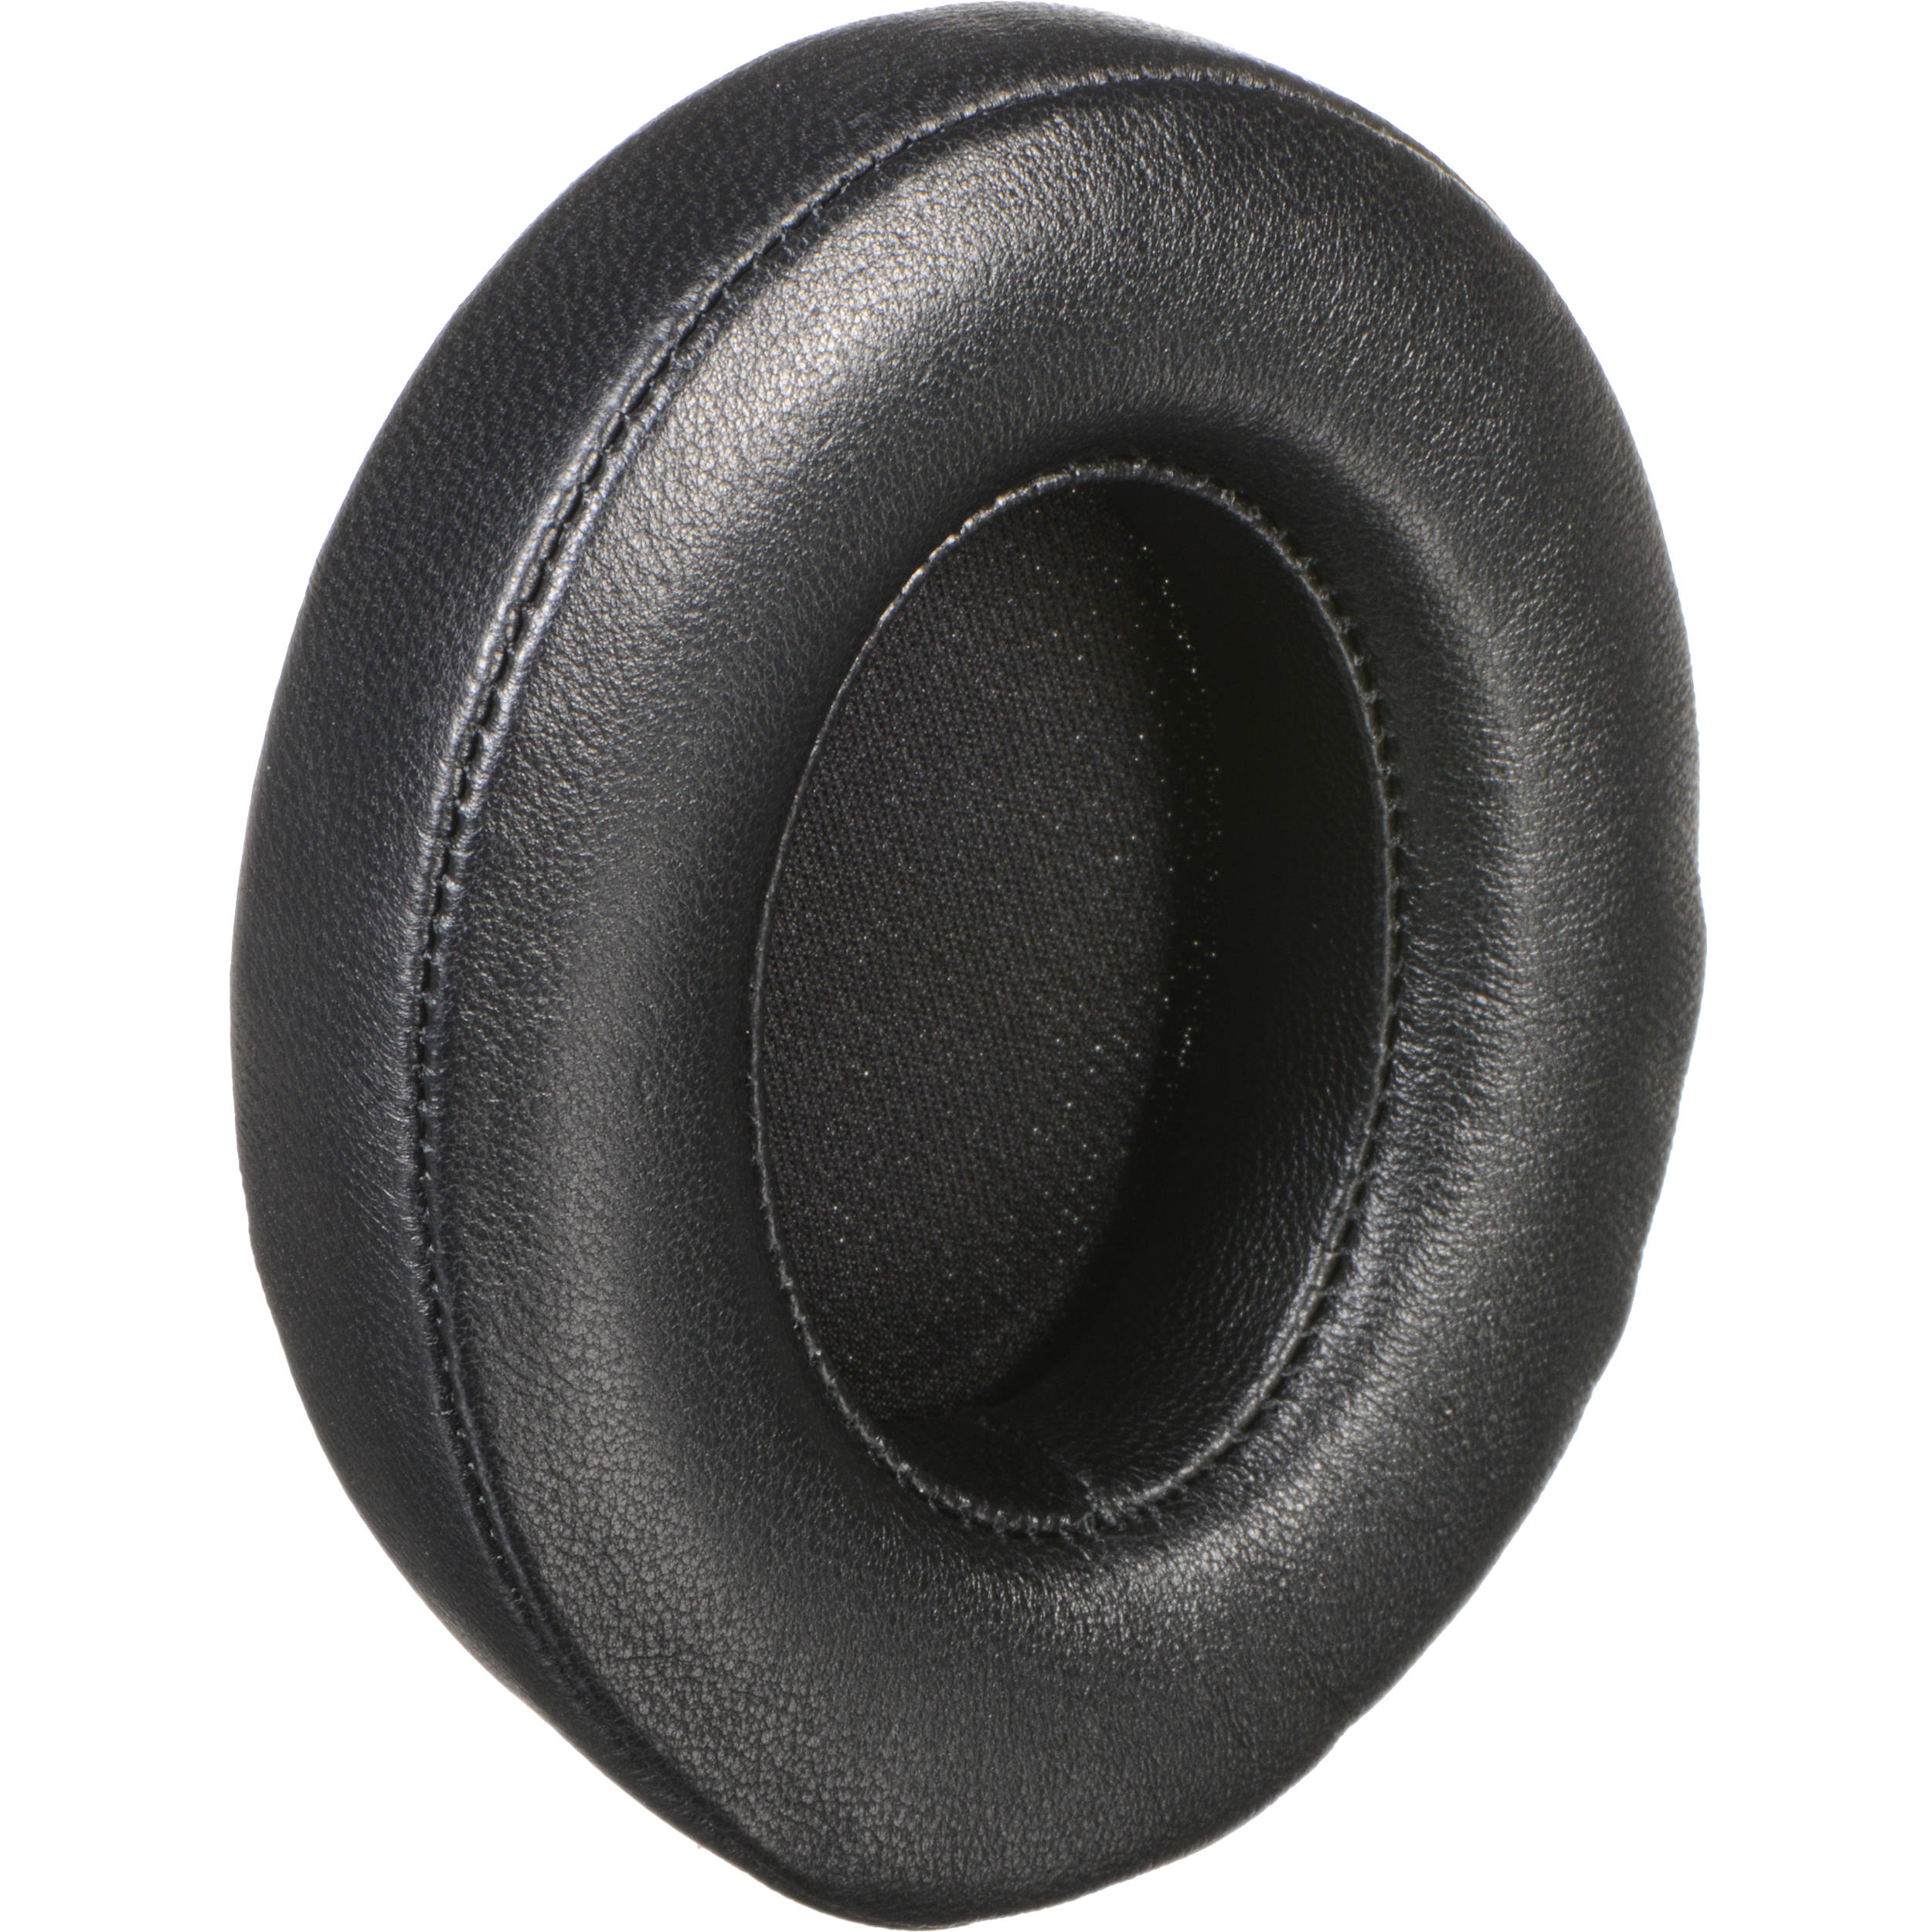 replacement earpads for beats studio